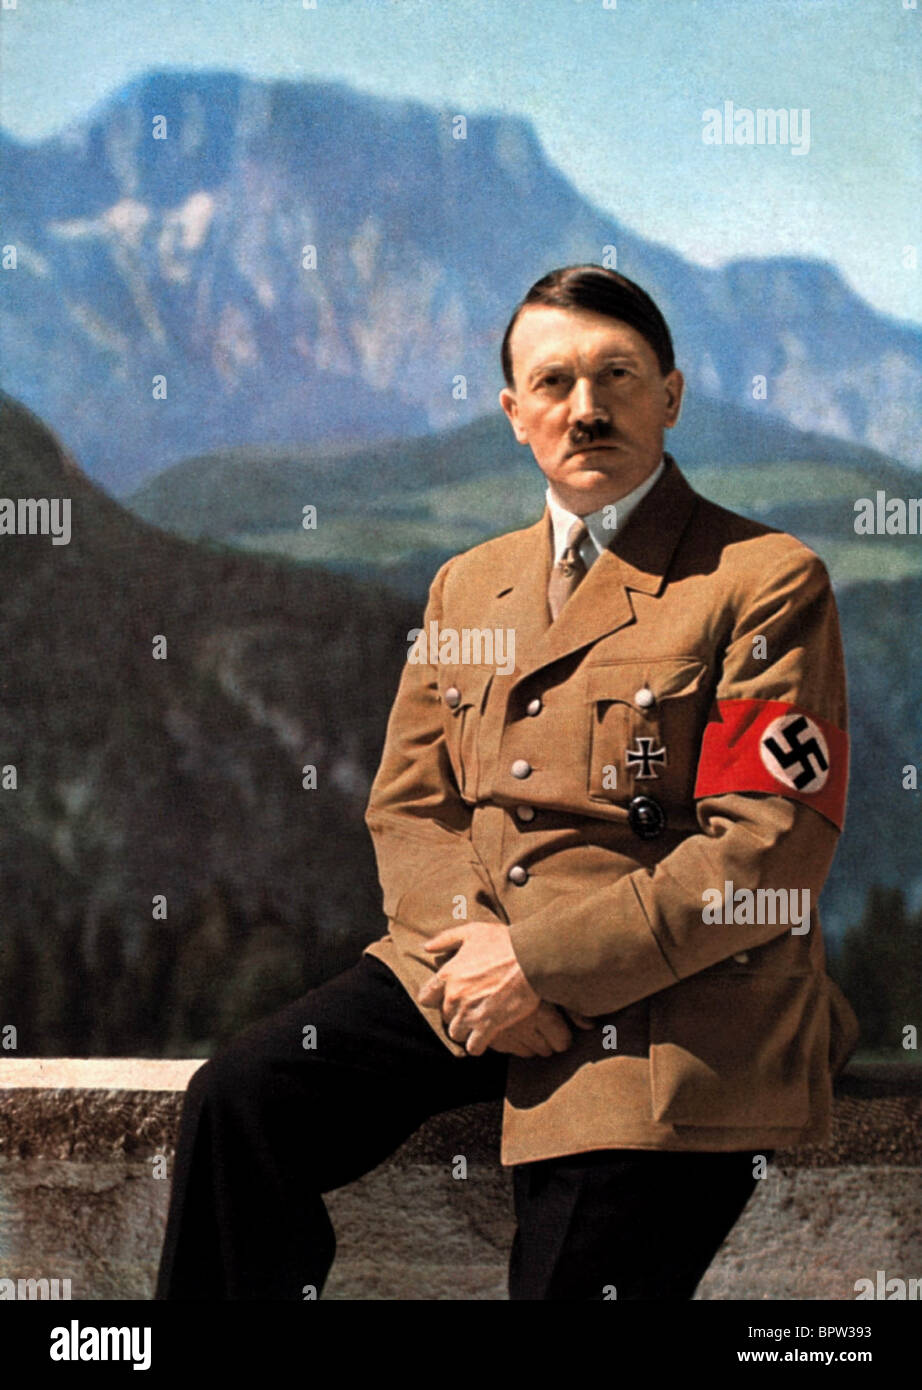 ADOLF HITLER IN EARLY 1940'S FUHRER OF GERMANY 01 May 1941 OBERSALZBERG GERMANY Stock Photo